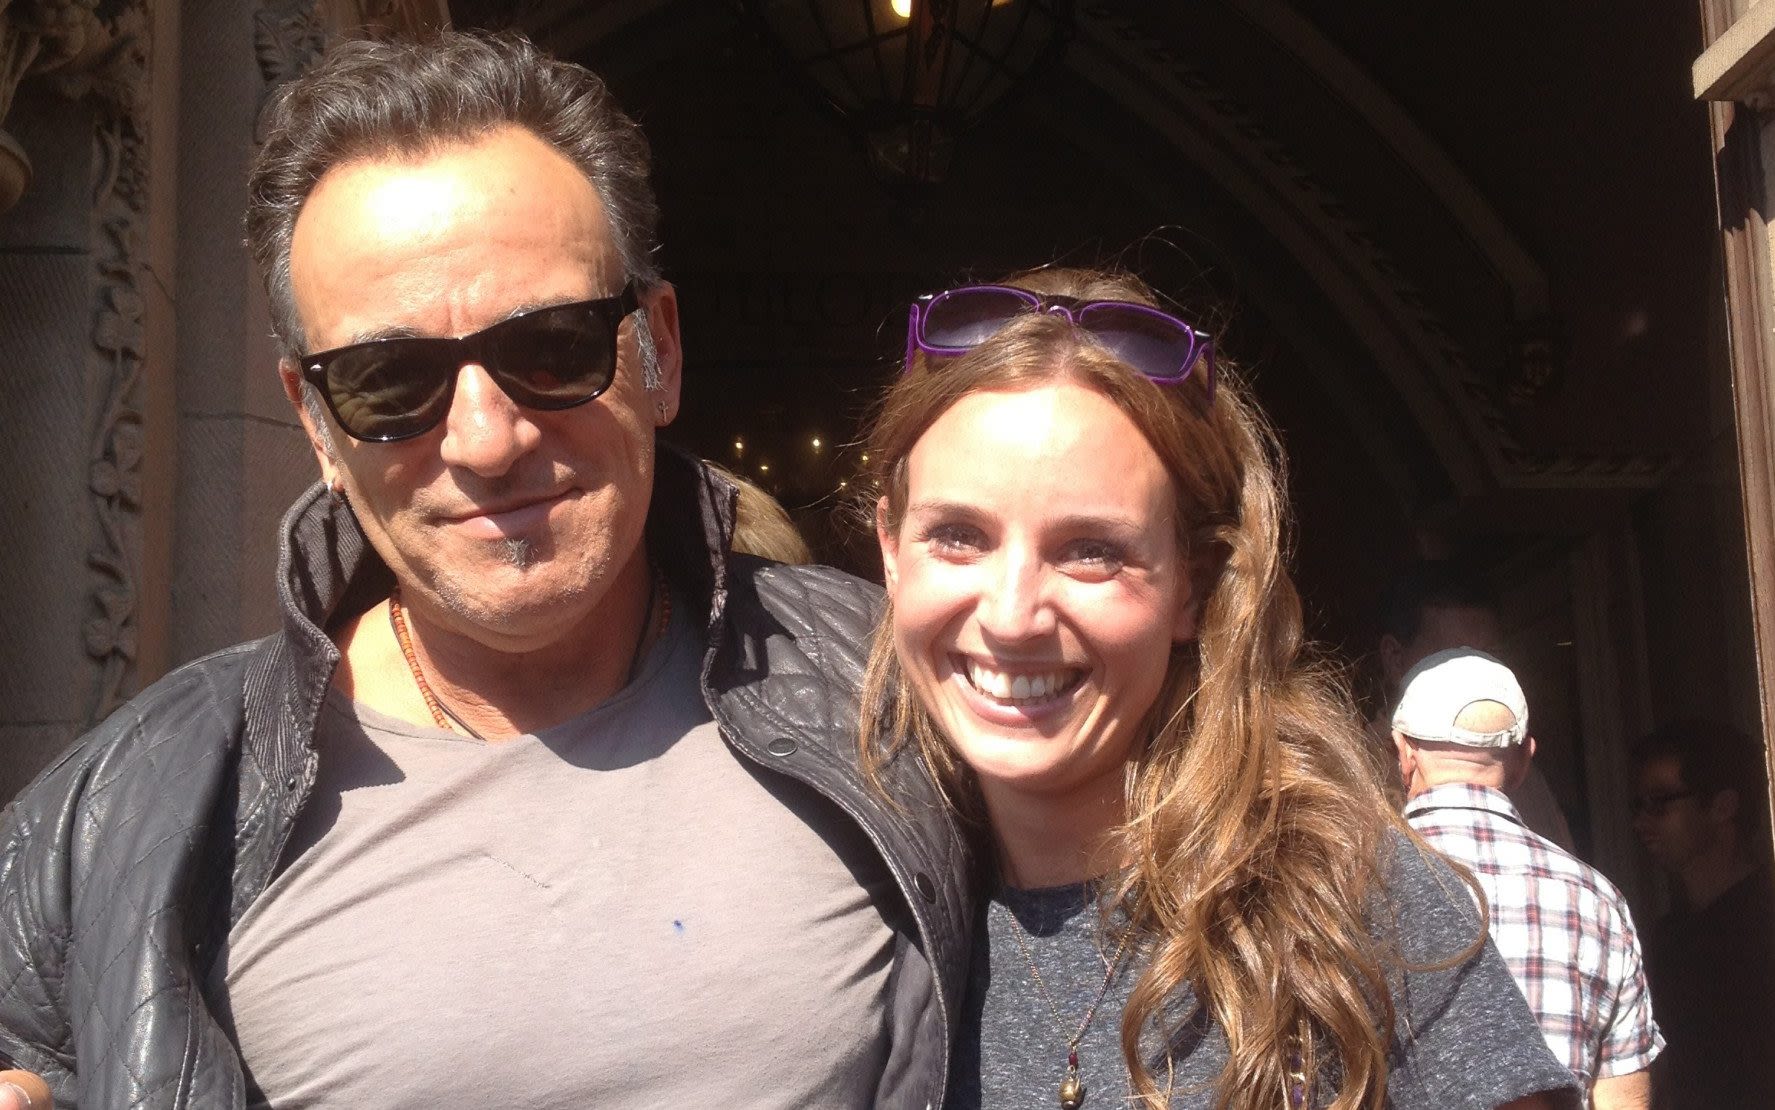 I’ve spent 20 years following Bruce Springsteen around the world – people think I’m crazy